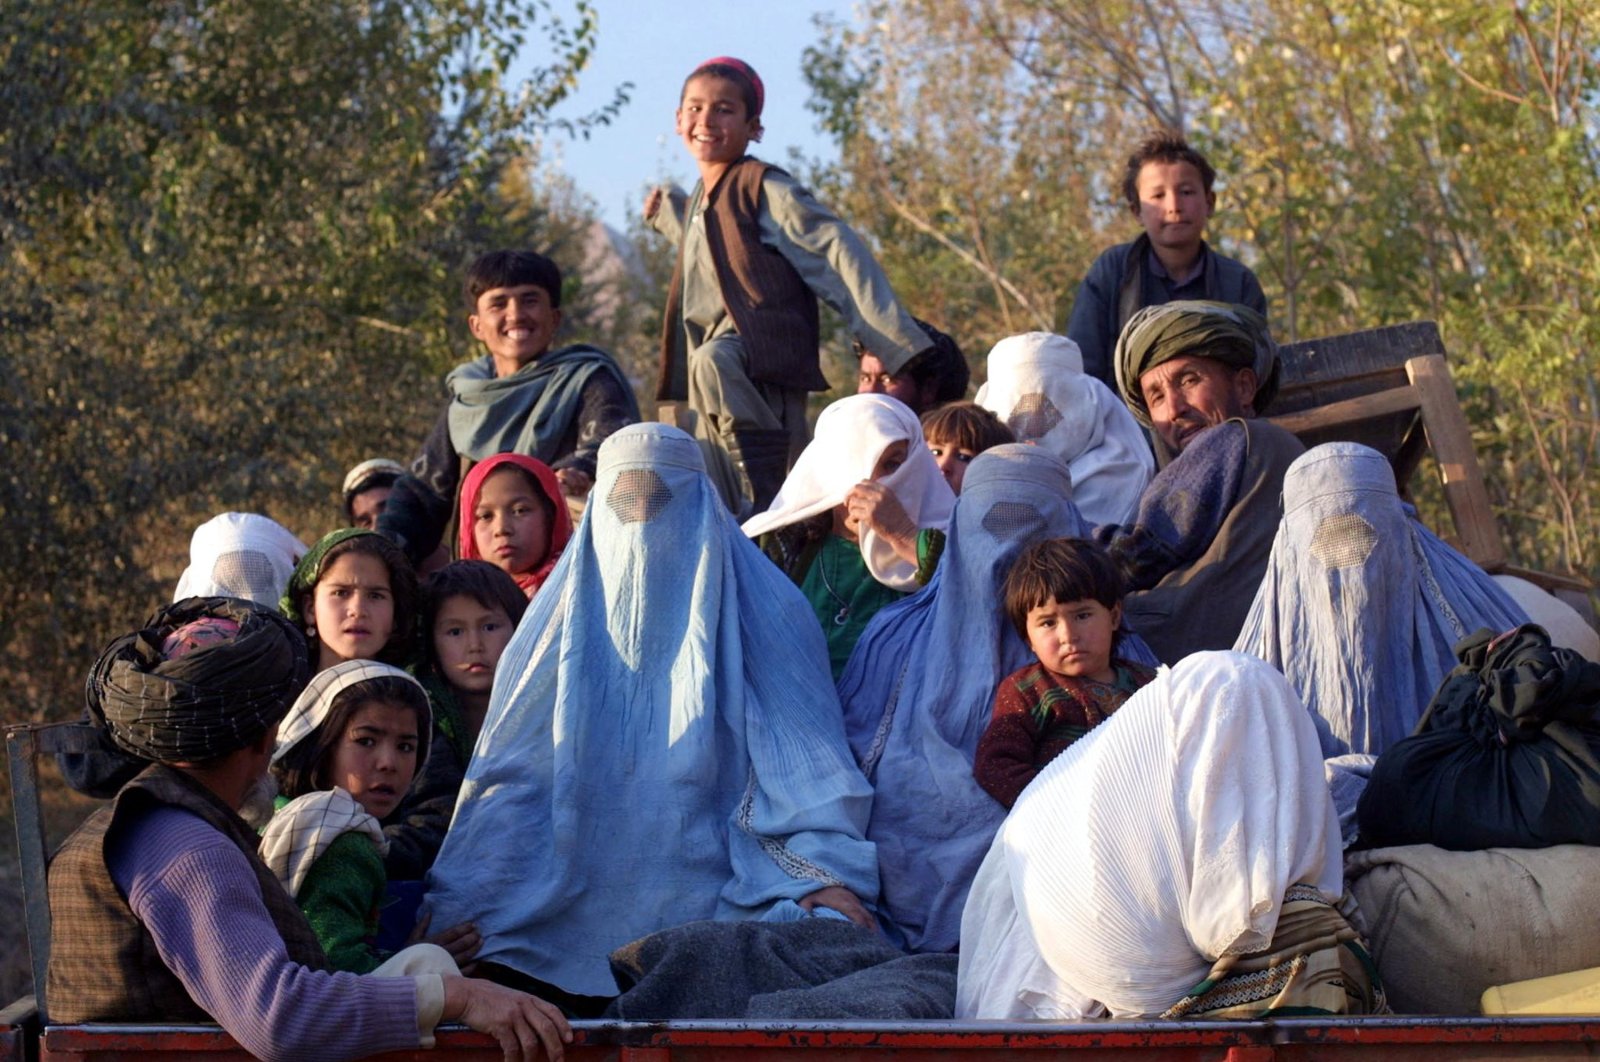 Residents of the northeastern Afghan village of Kalaqata in Takhar province fleeing the frontline area as U.S. fighter planes bomb Taliban positions nearby, Nov. 4, 2001.